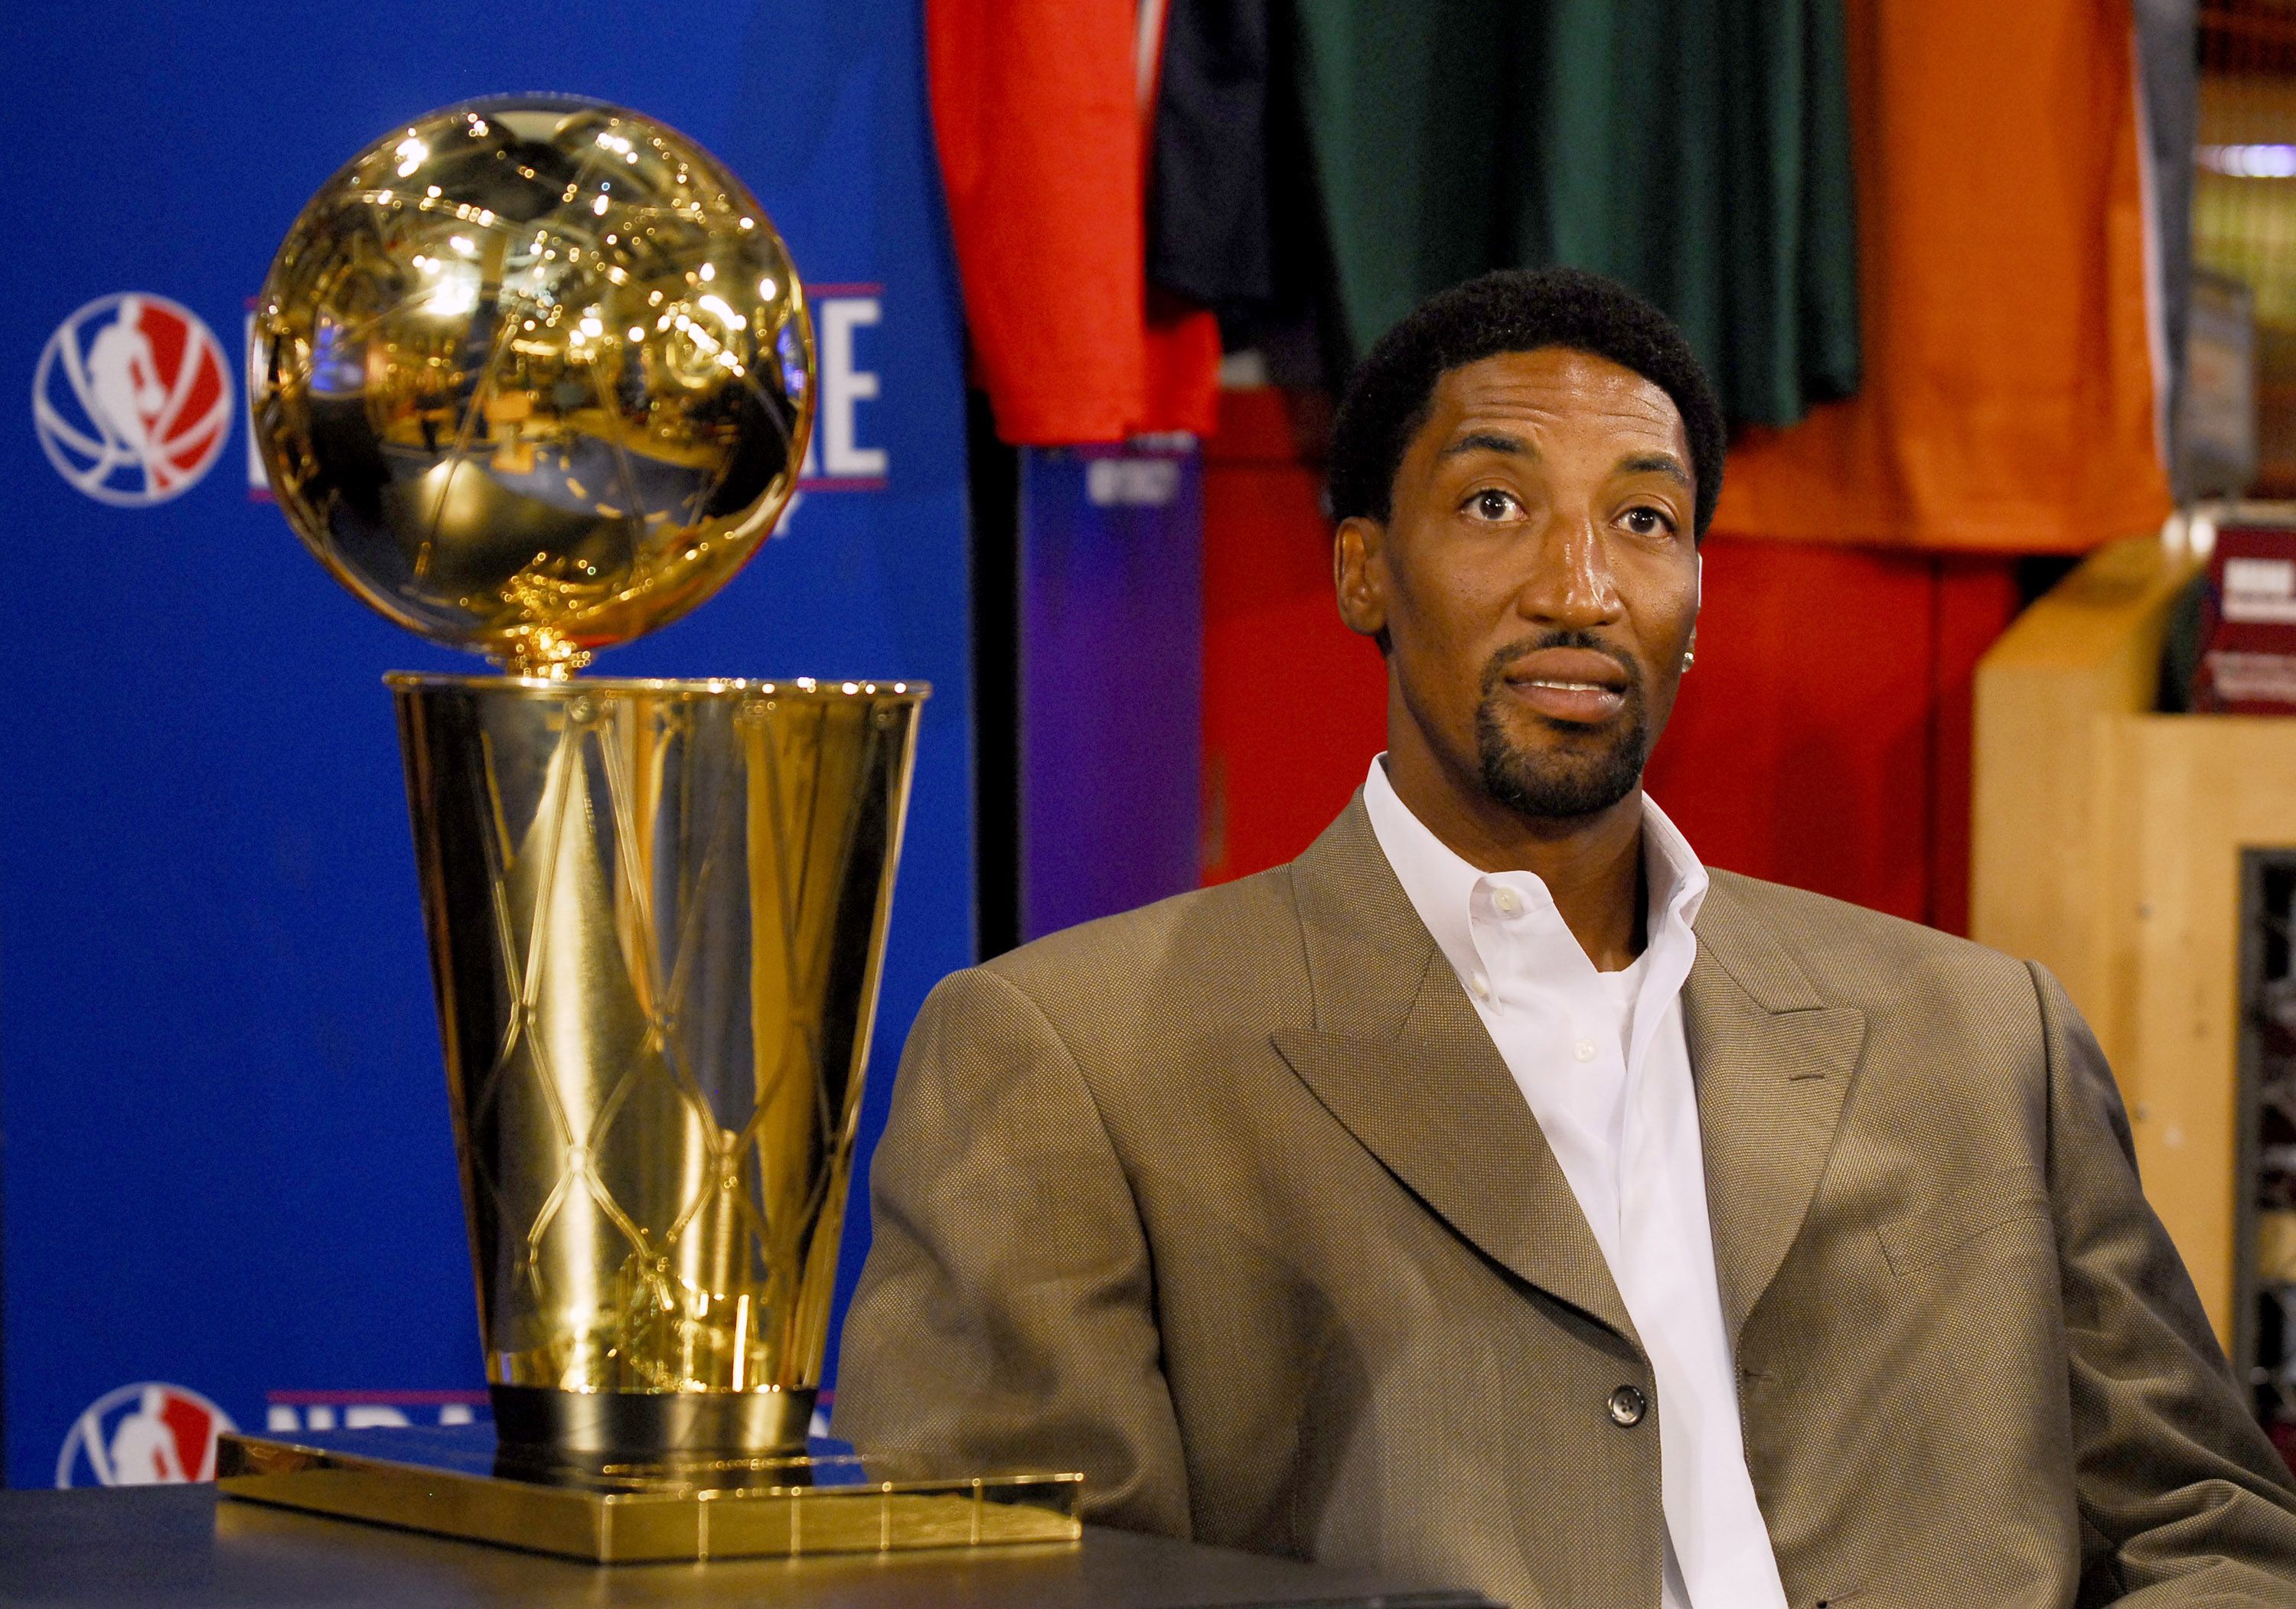 Opinion: Scottie Pippen comments on Michael Jordan say sad things